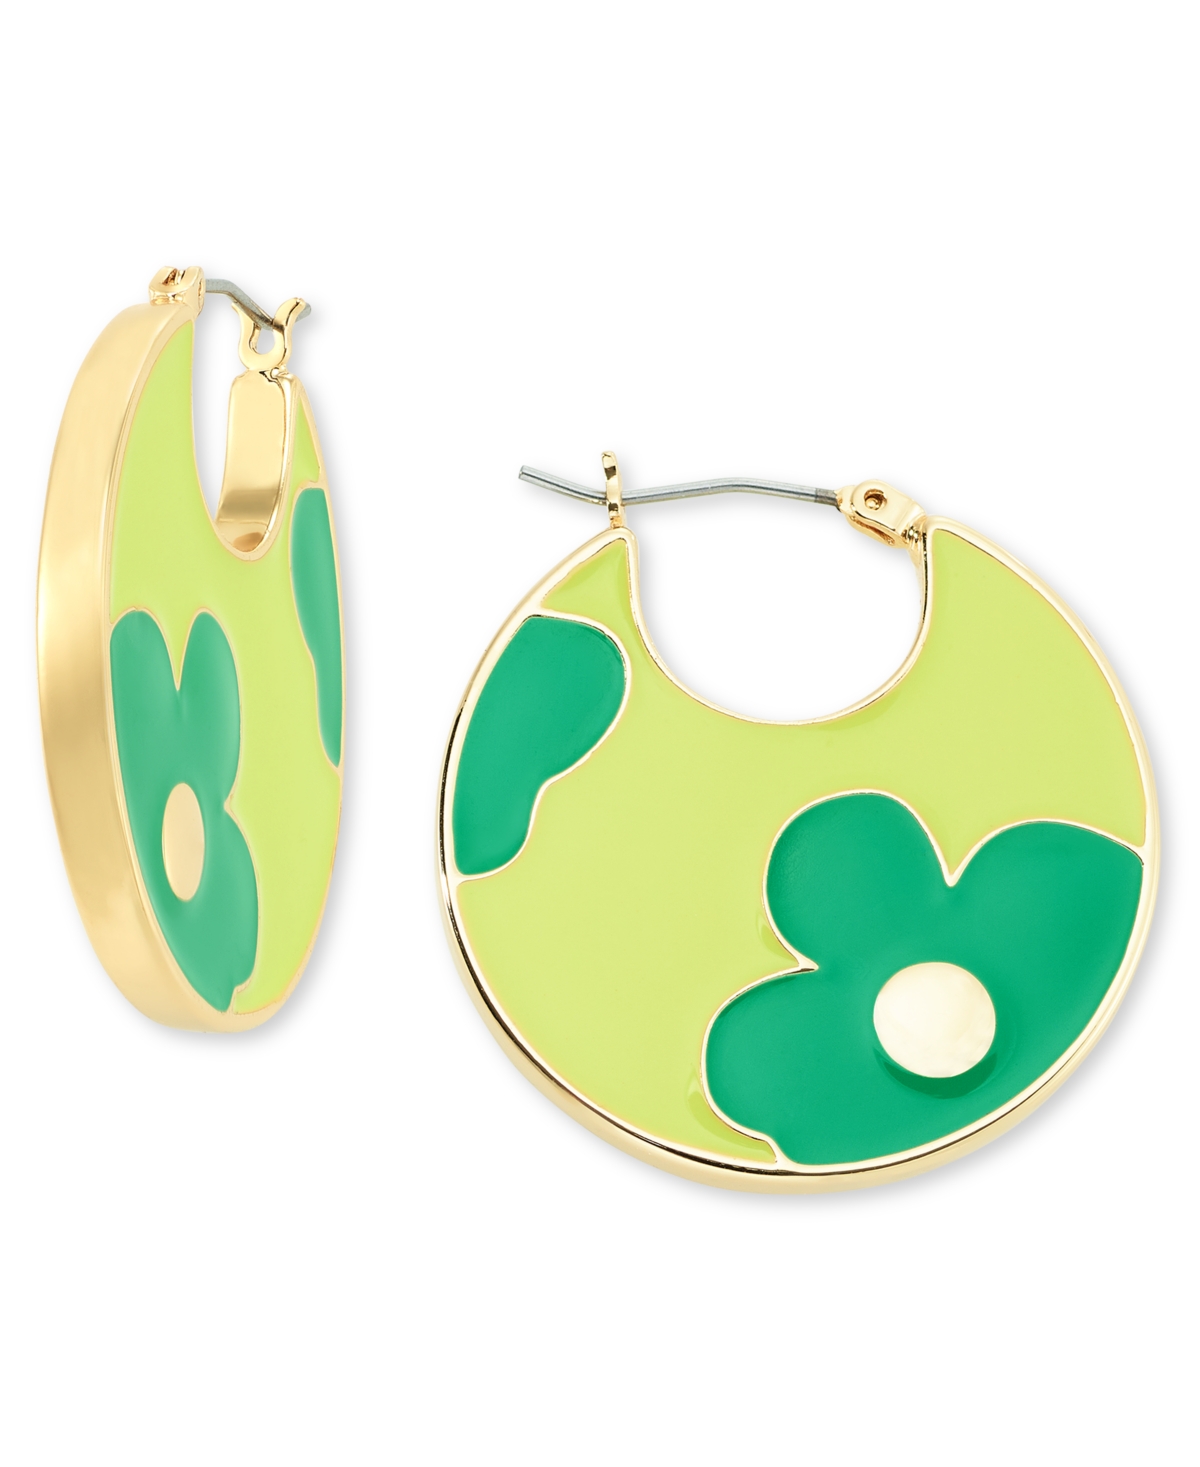 Gold-Tone Floral Enamel Round Drop Earrings, Created for Macy's - Green